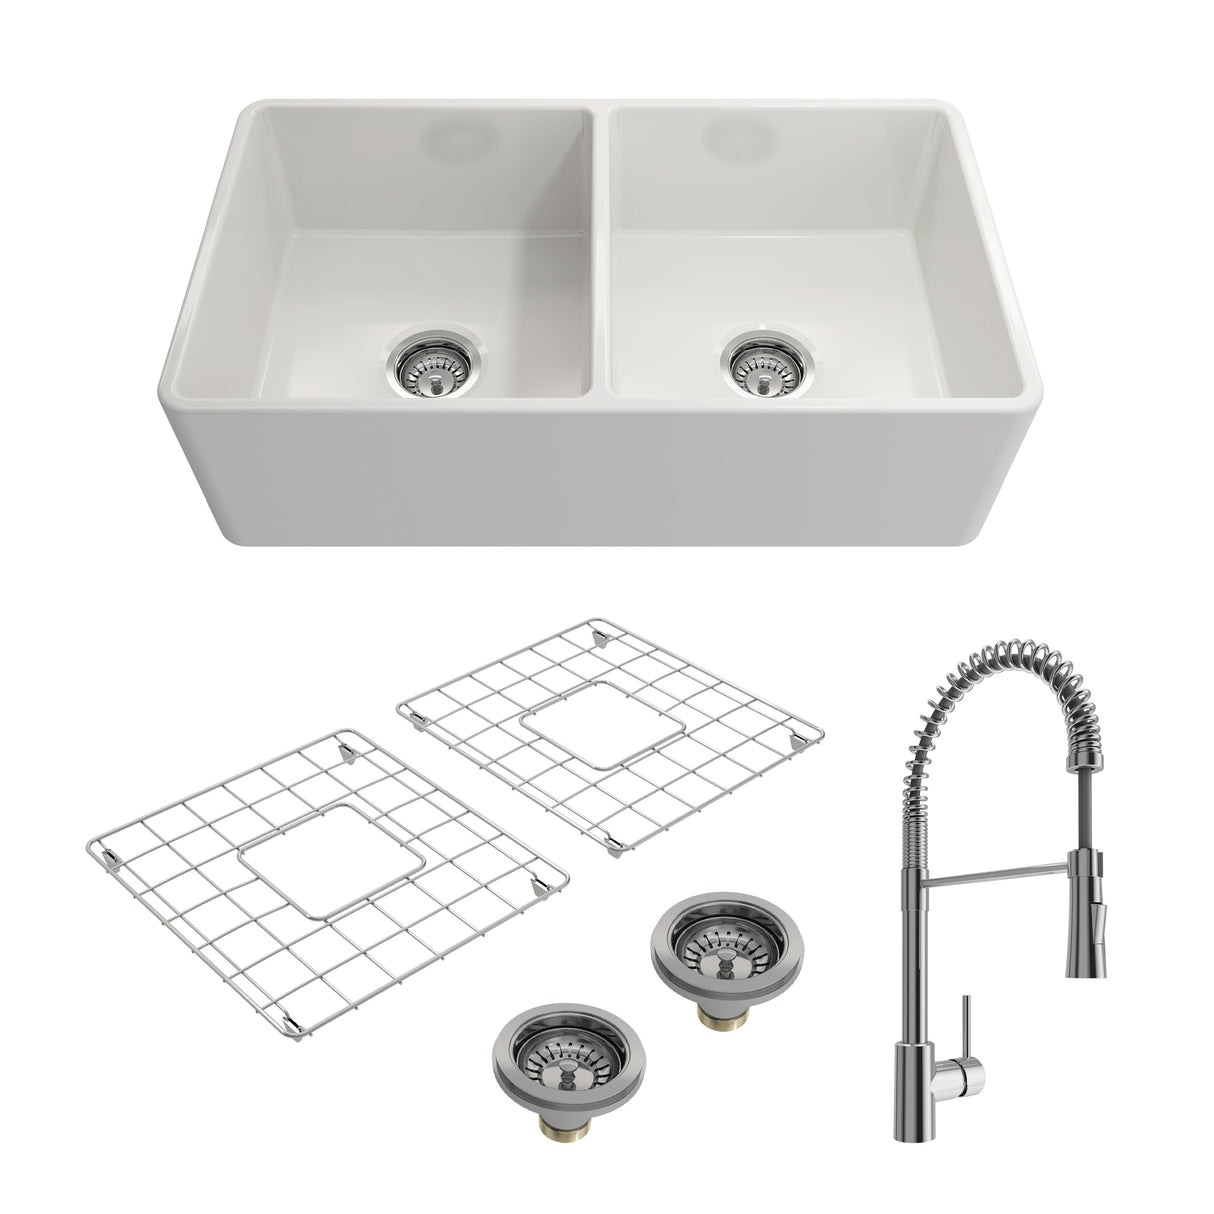 BOCCHI 1139-001-2020CH Kit: 1139 Classico Farmhouse Apron Front Fireclay 33 in. Double Bowl Kitchen Sink with Protective Bottom Grids and Strainers w/ Livenza 2.0 Faucet